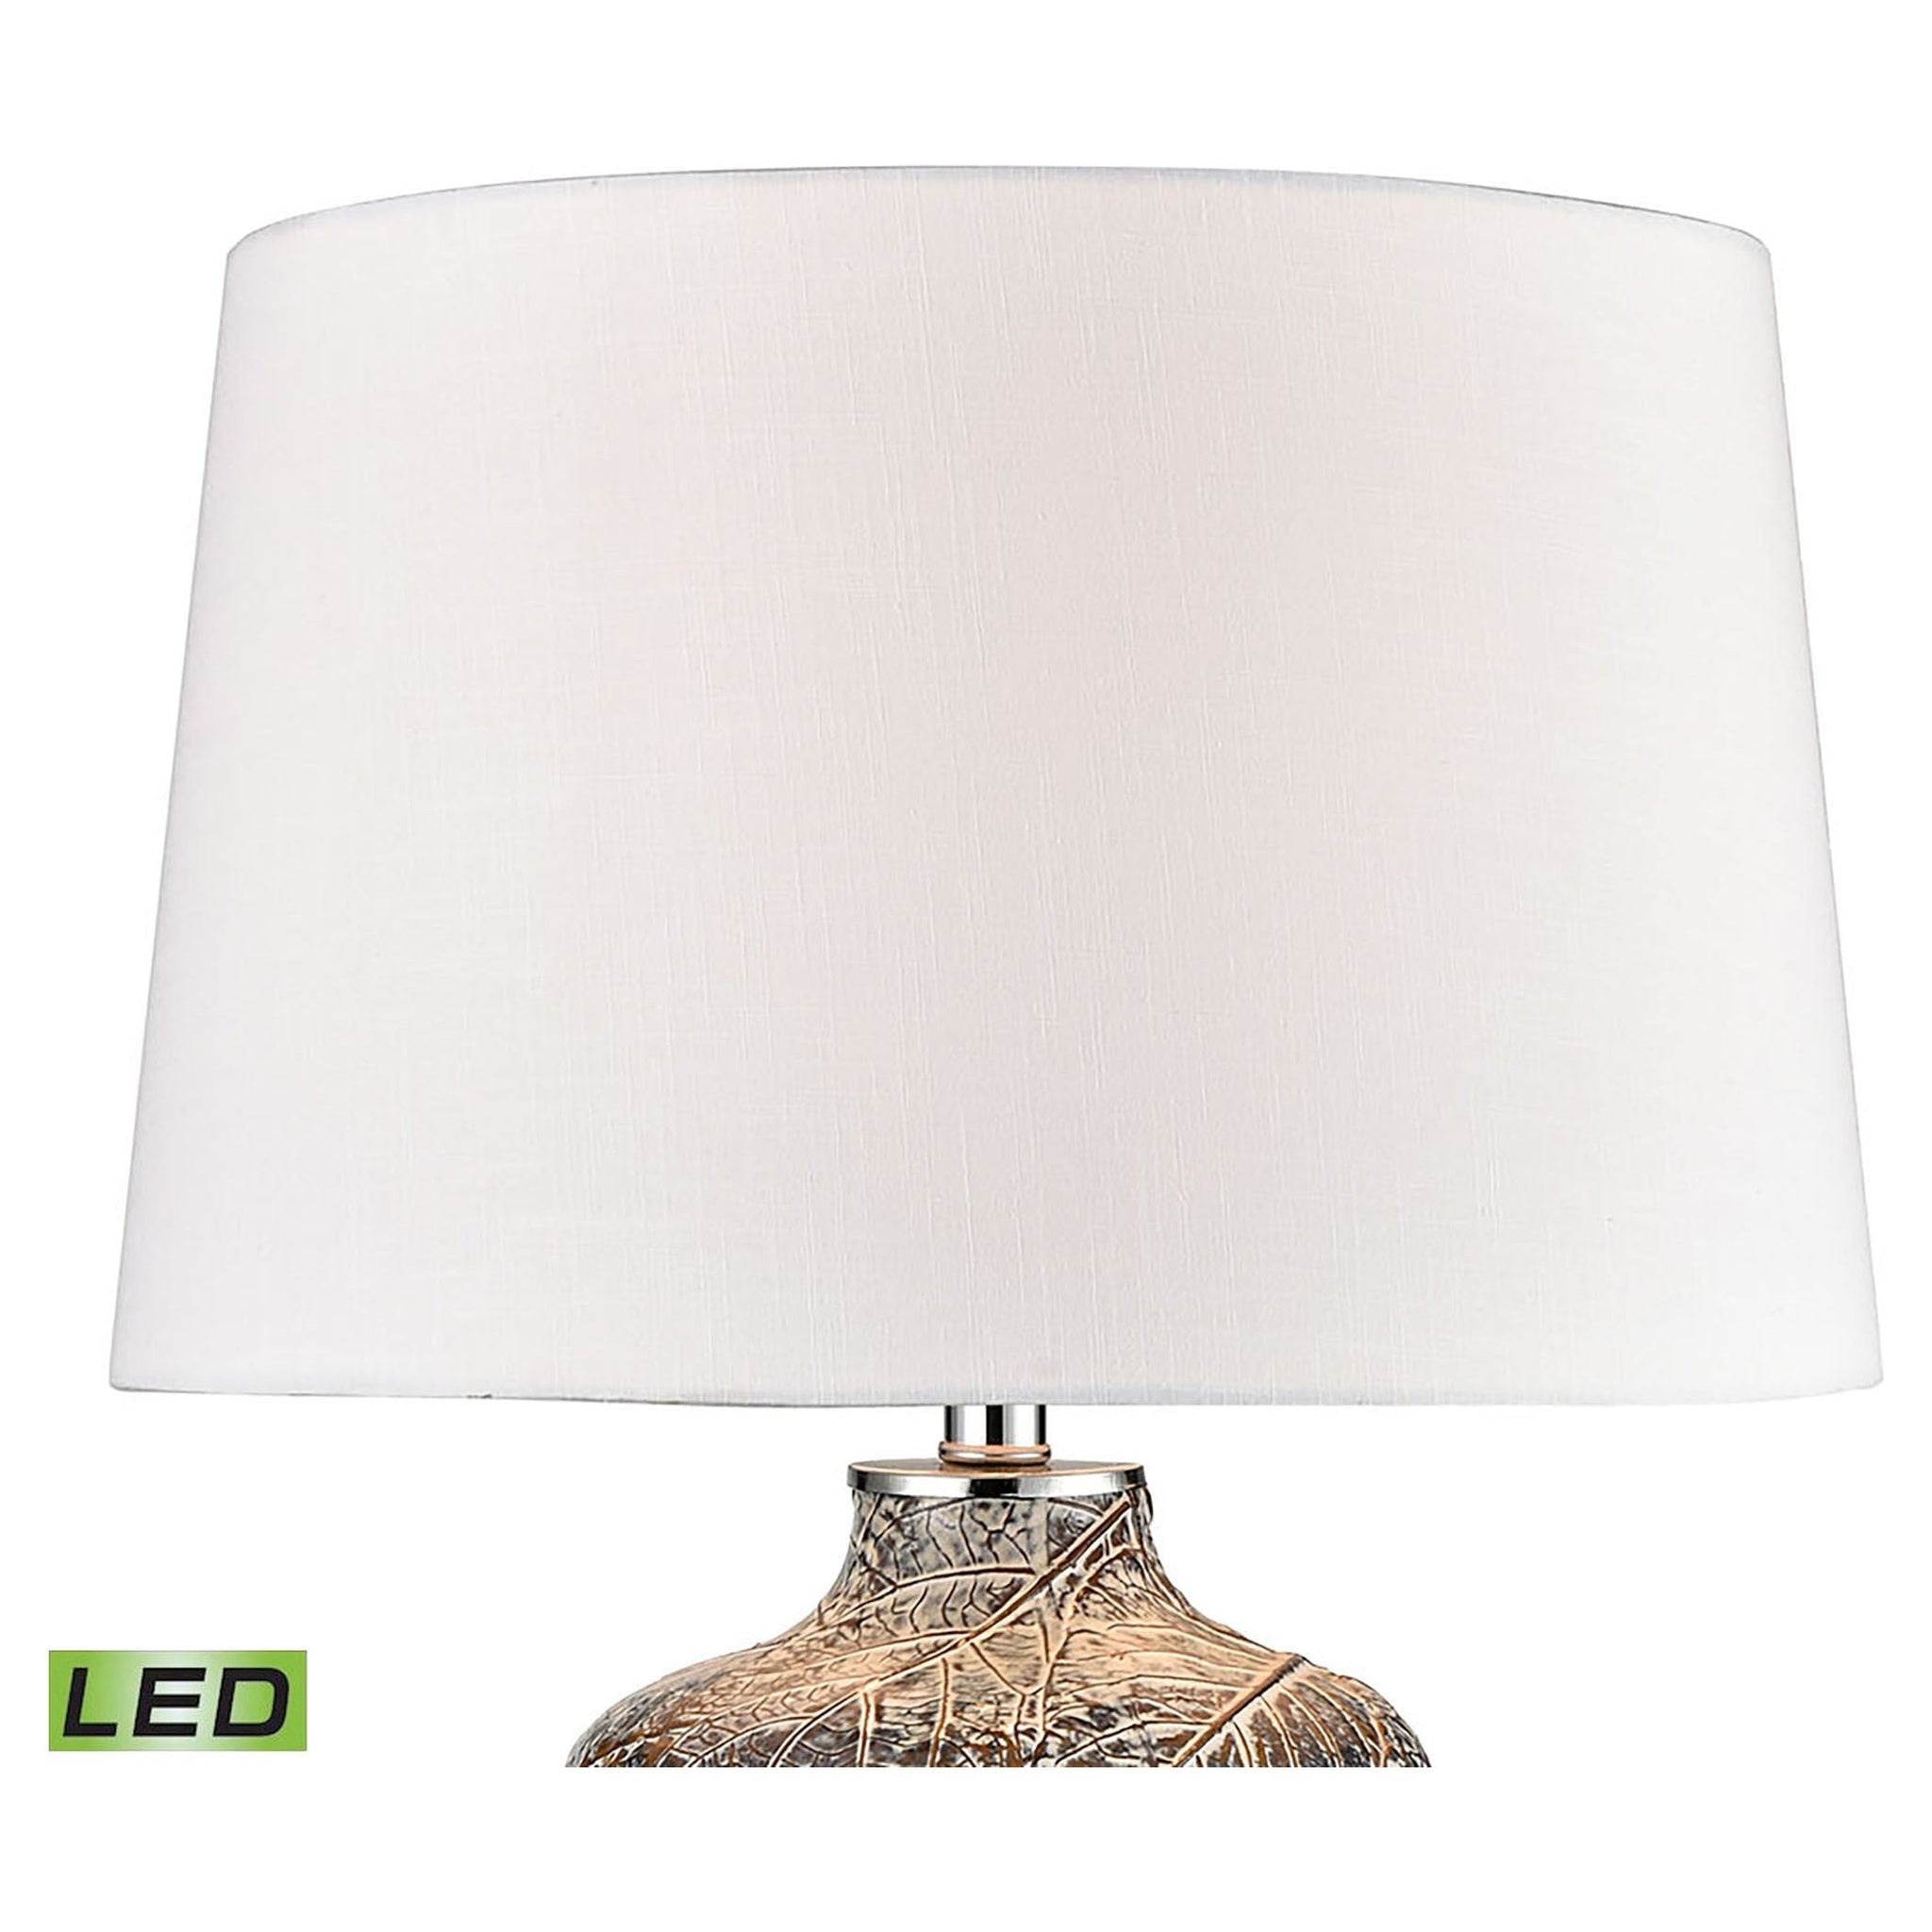 Forage 29" High 1-Light Table Lamp